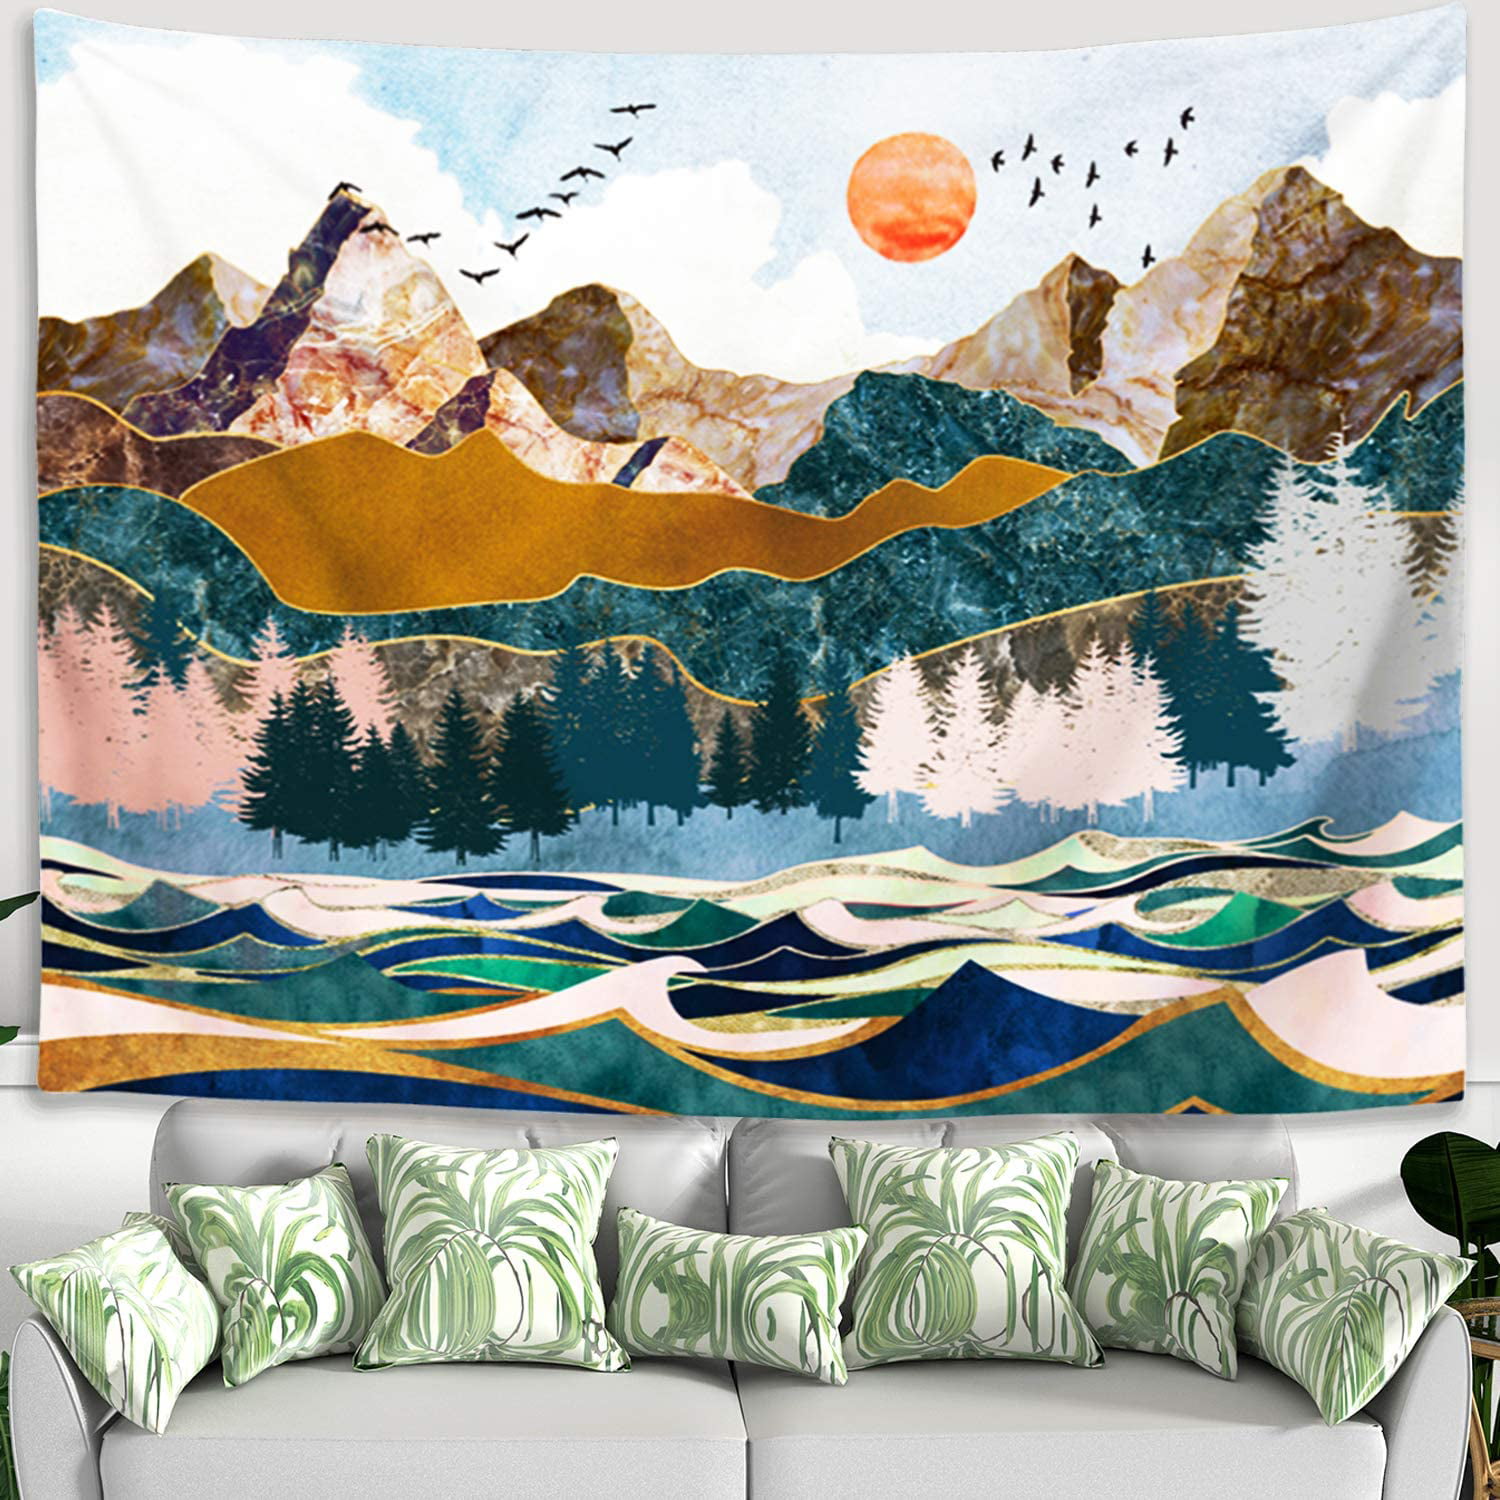 Mountain Sky Nature Scenery Tapestry Art Wall Hanging Beach Towel Mat Home Decor 